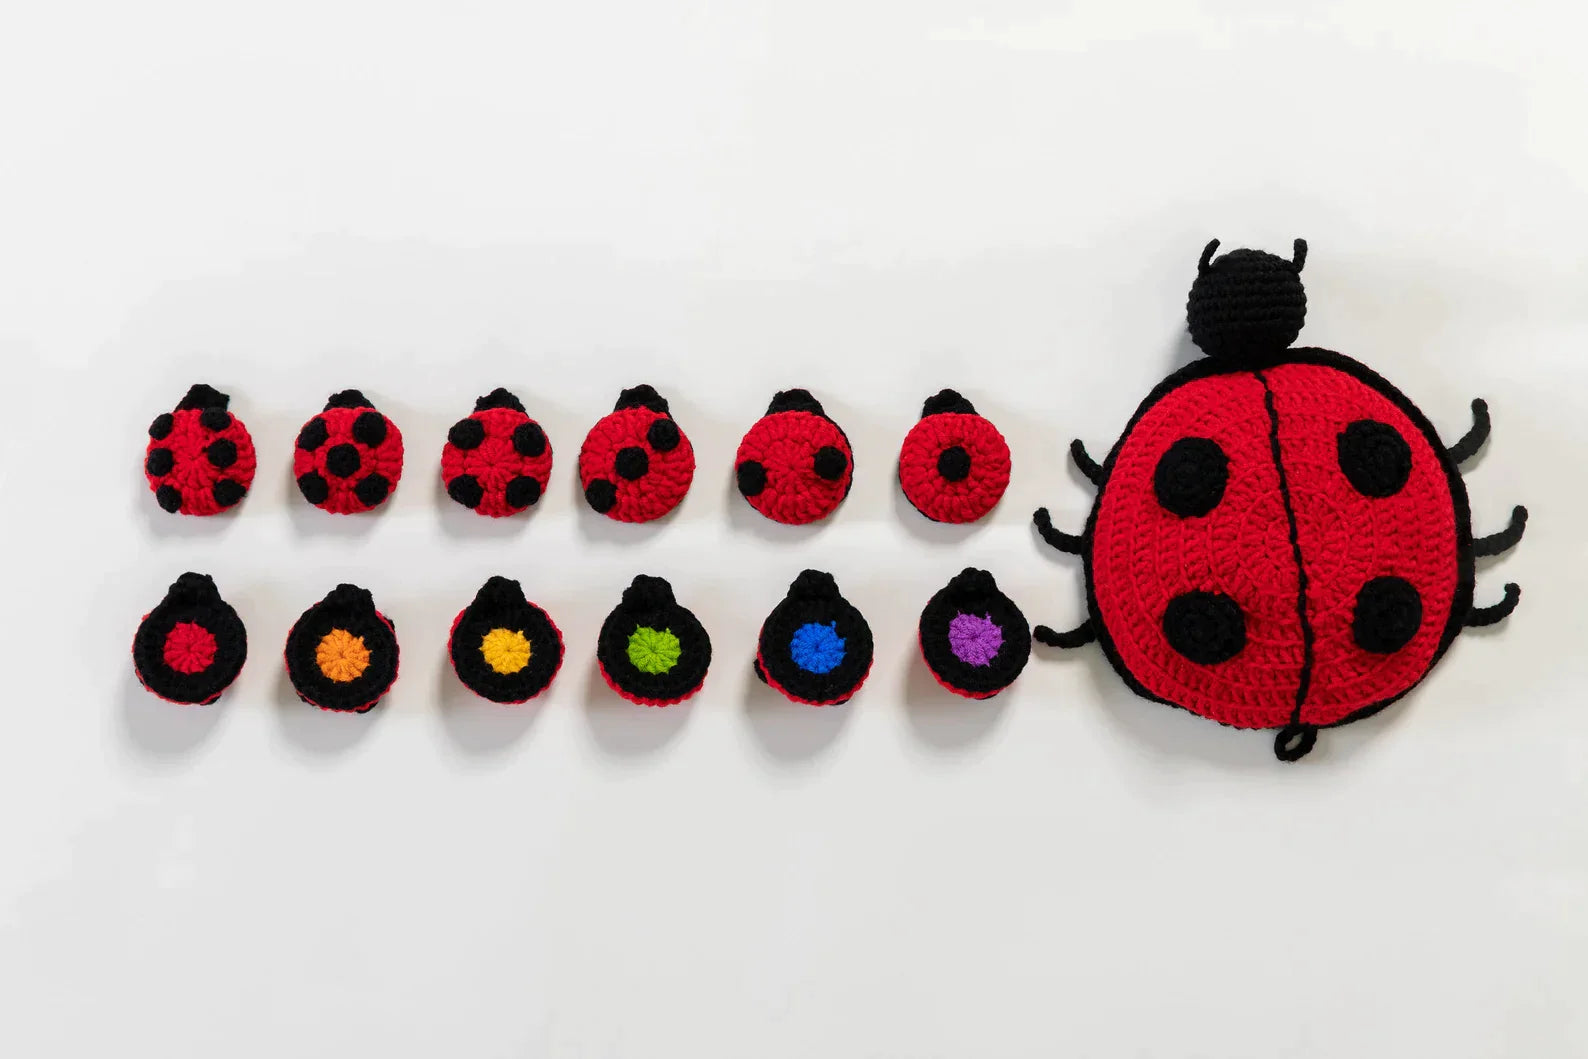 Counting Ladybugs Game Crochet Pattern